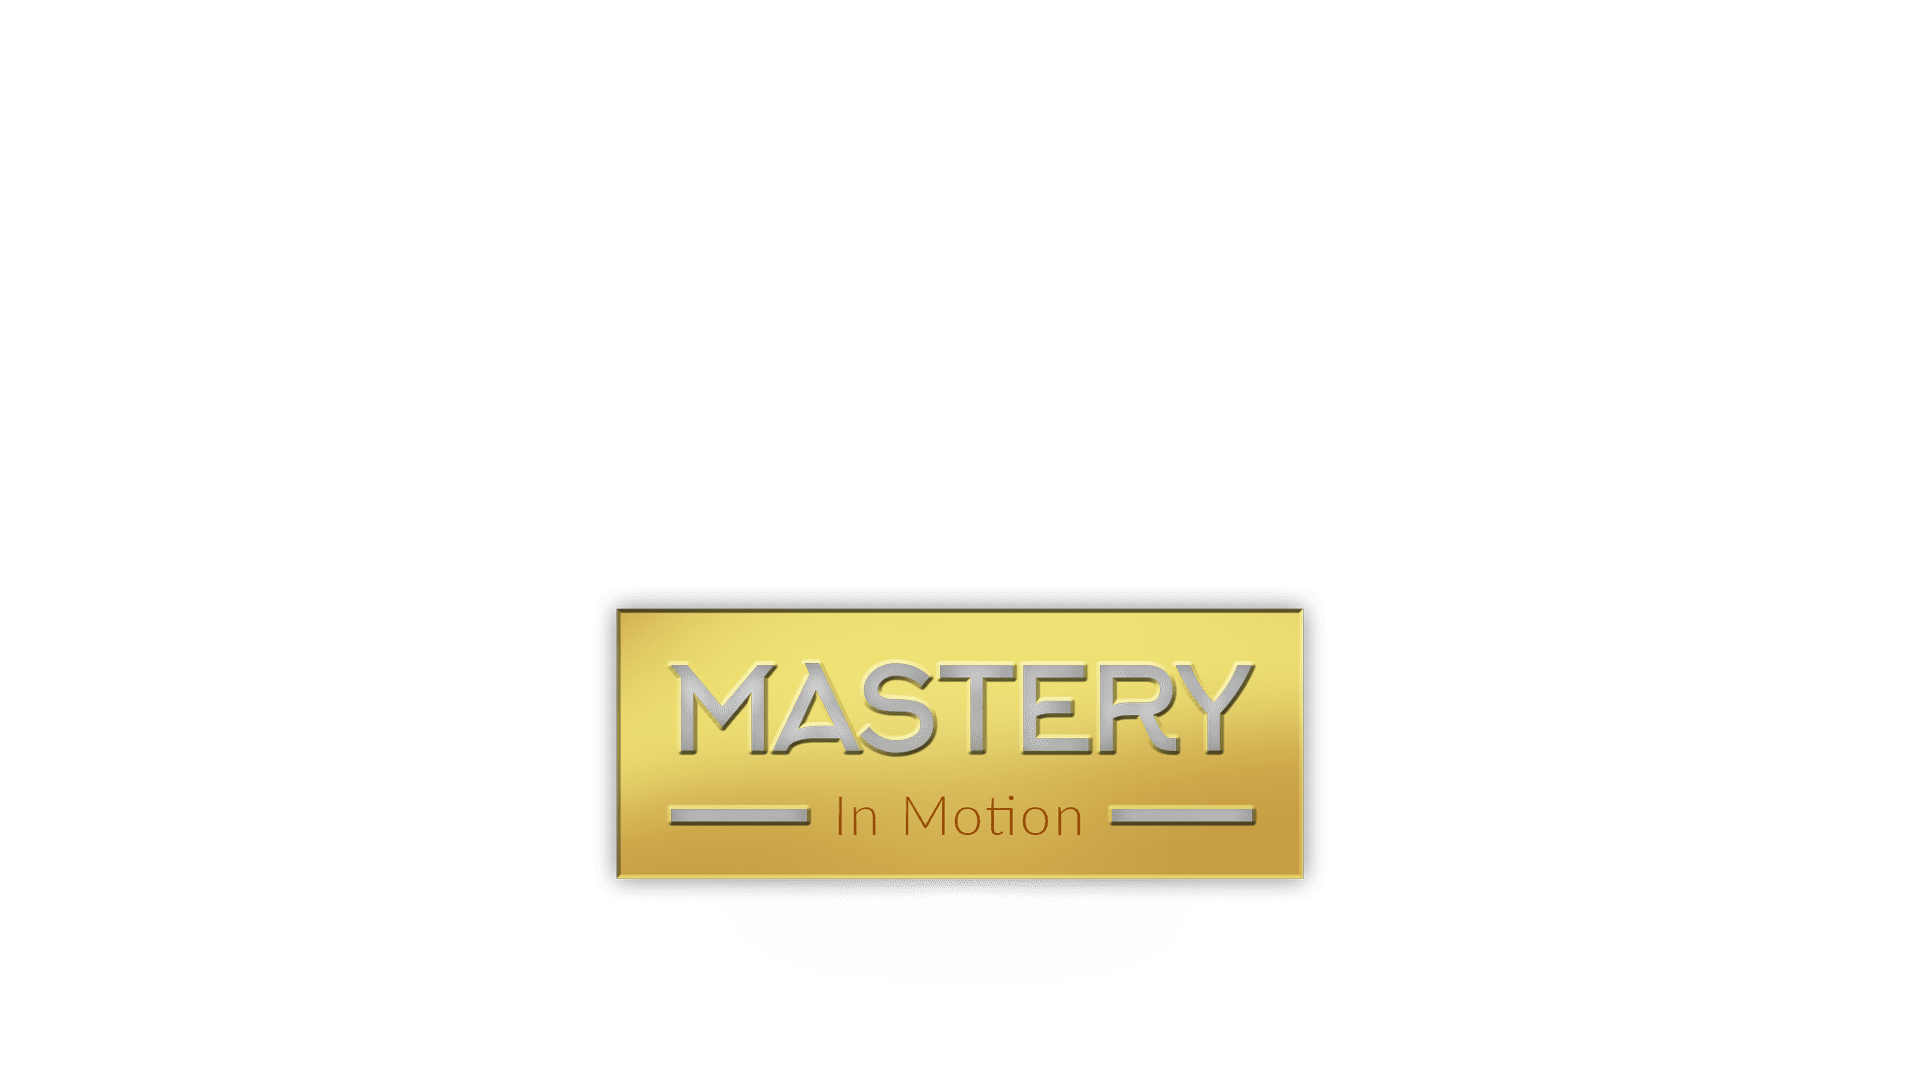 ron damico mastery in motion gold 5